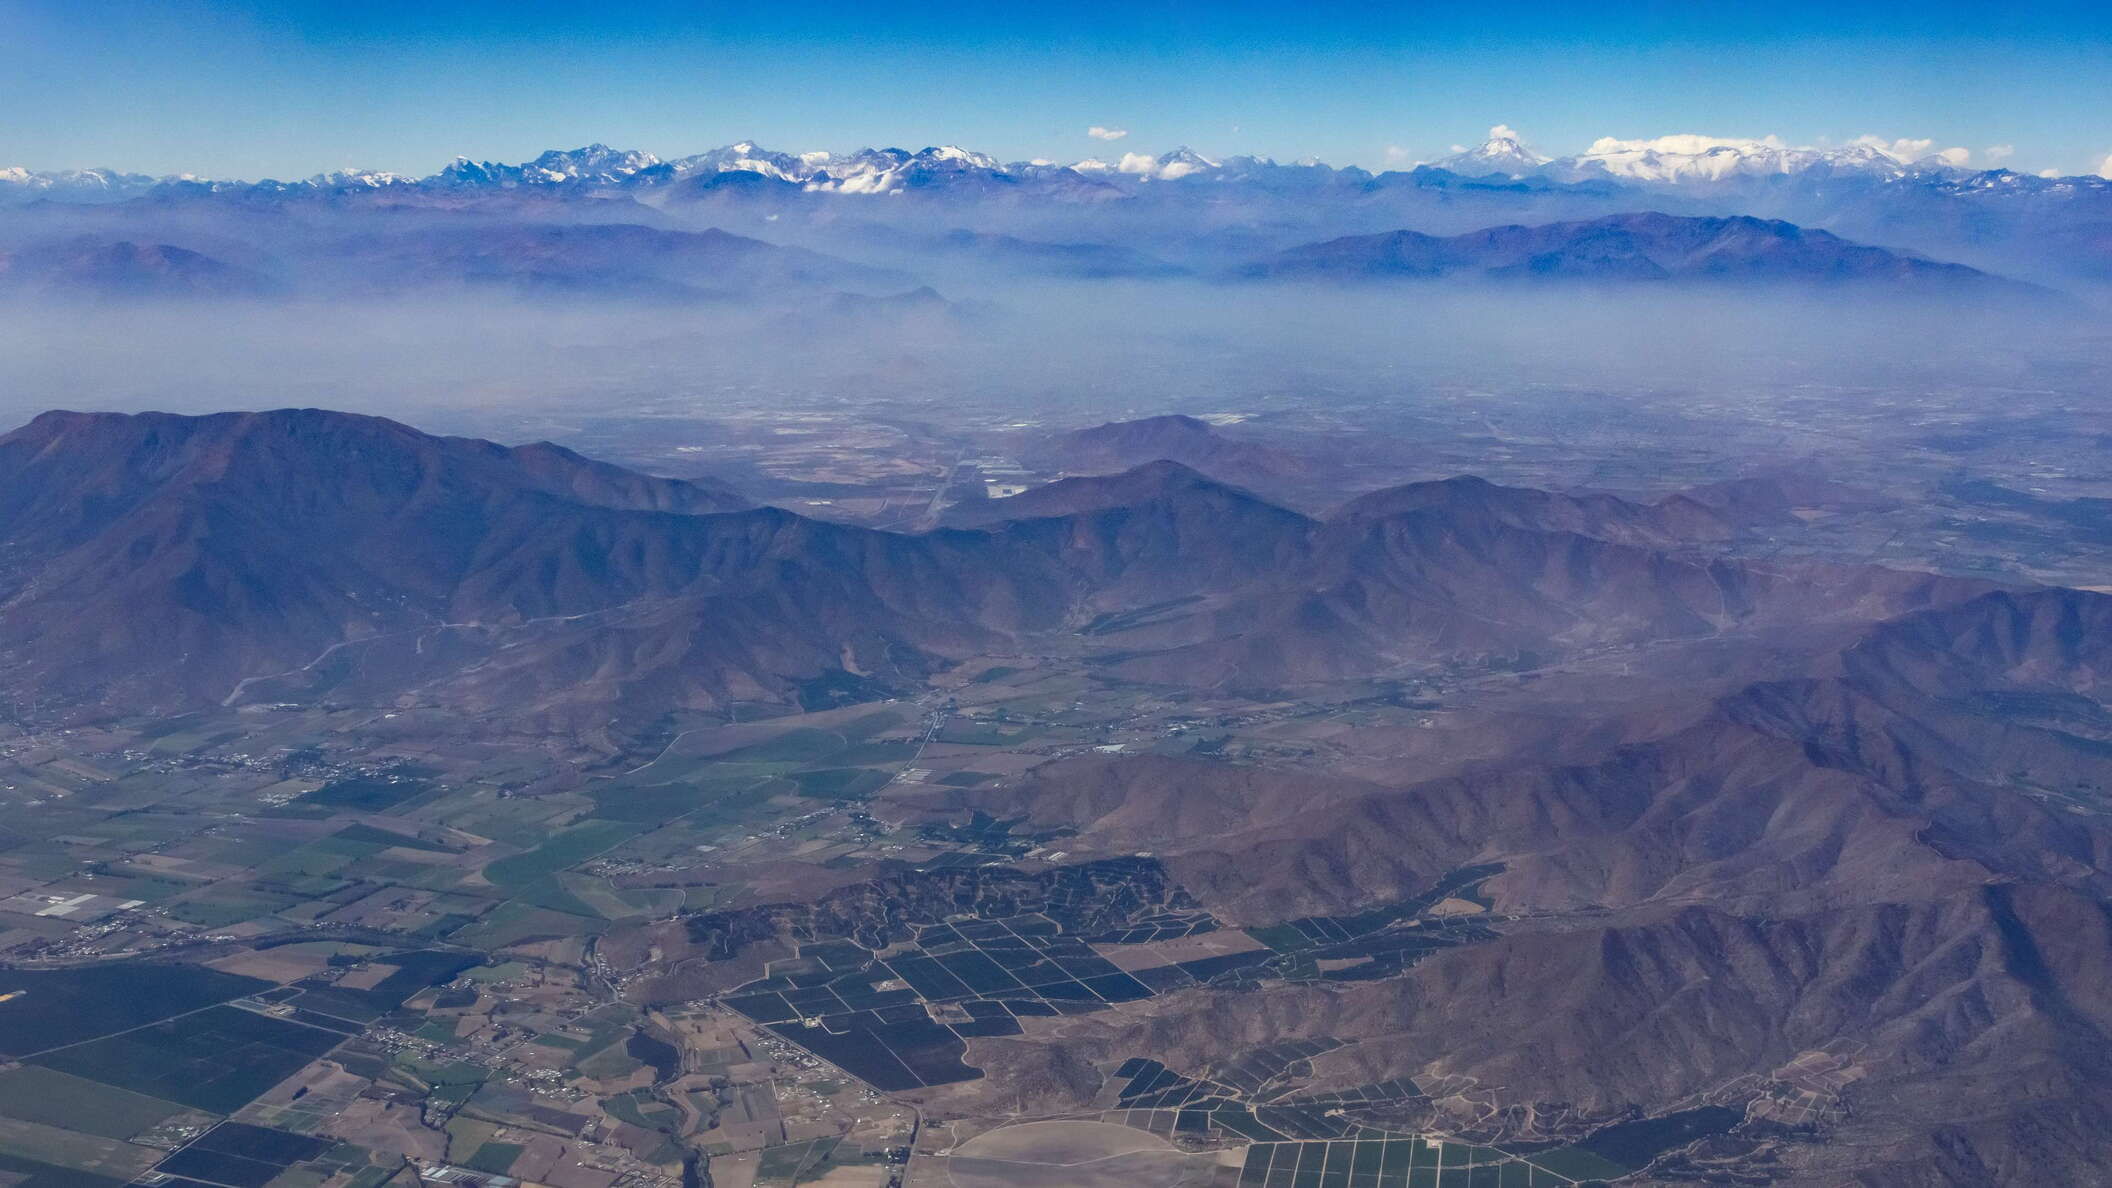 Coast range with Puangue valley and Santiago basin